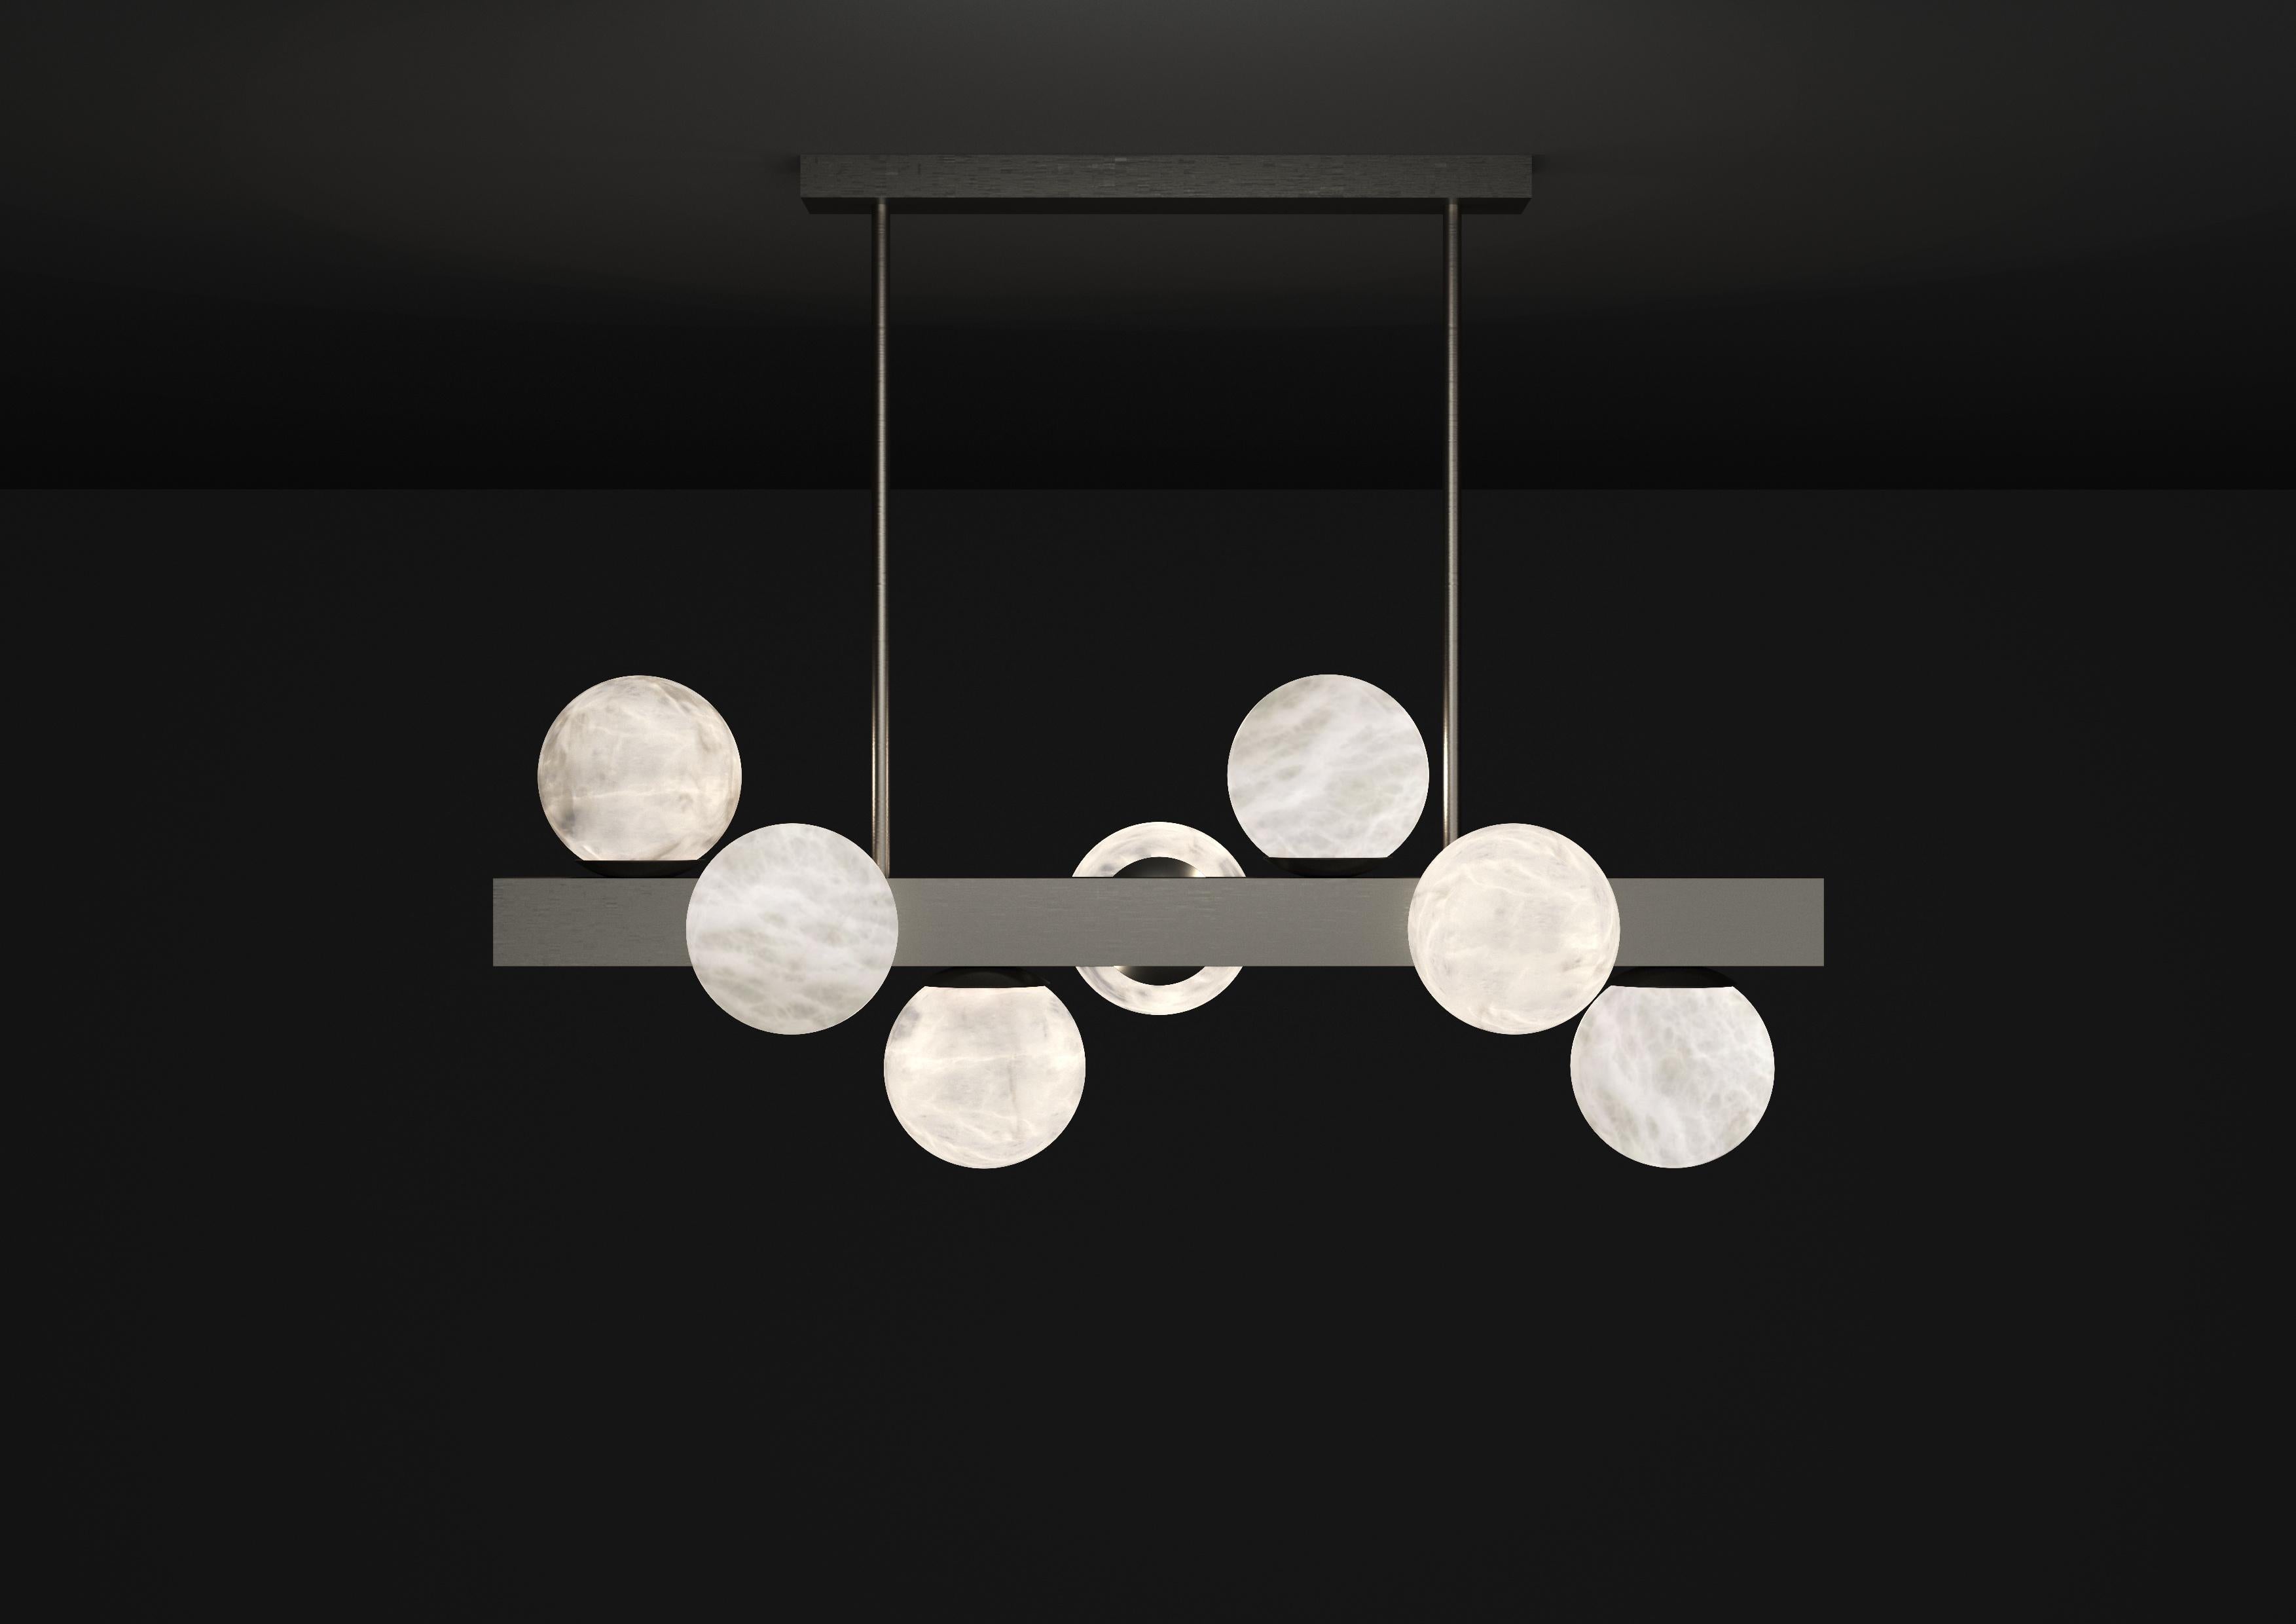 Dioniso Brushed Black Metal Pendant Lamp by Alabastro Italiano
Dimensions: D 35 x W 91 x H 36 cm.
Materials: White alabaster and metal.

Available in different finishes: Shiny Silver, Bronze, Brushed Brass, Ruggine of Florence, Brushed Burnished,